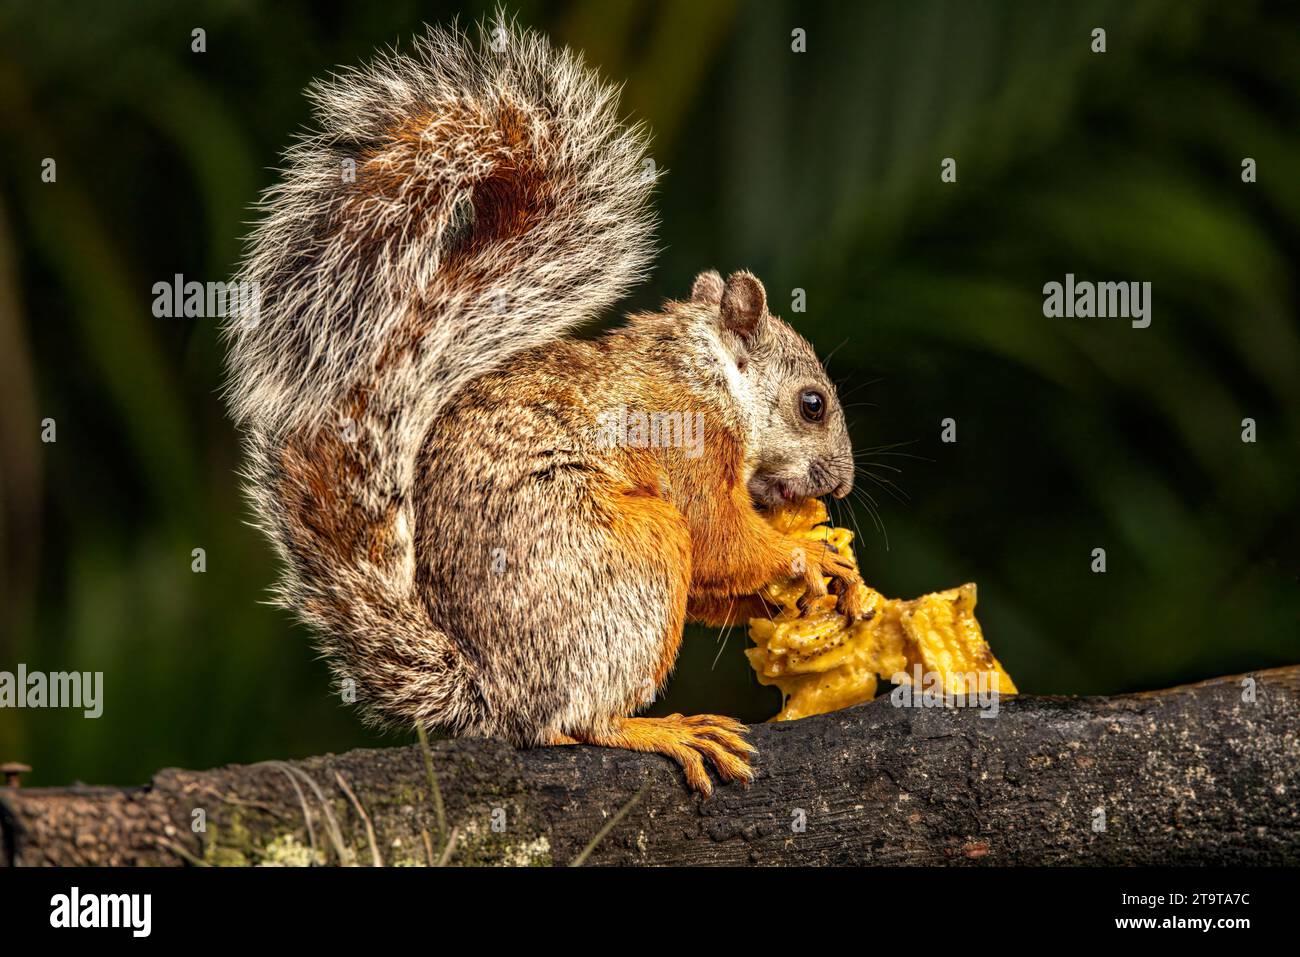 Red-tailed squirrel Stock Photo